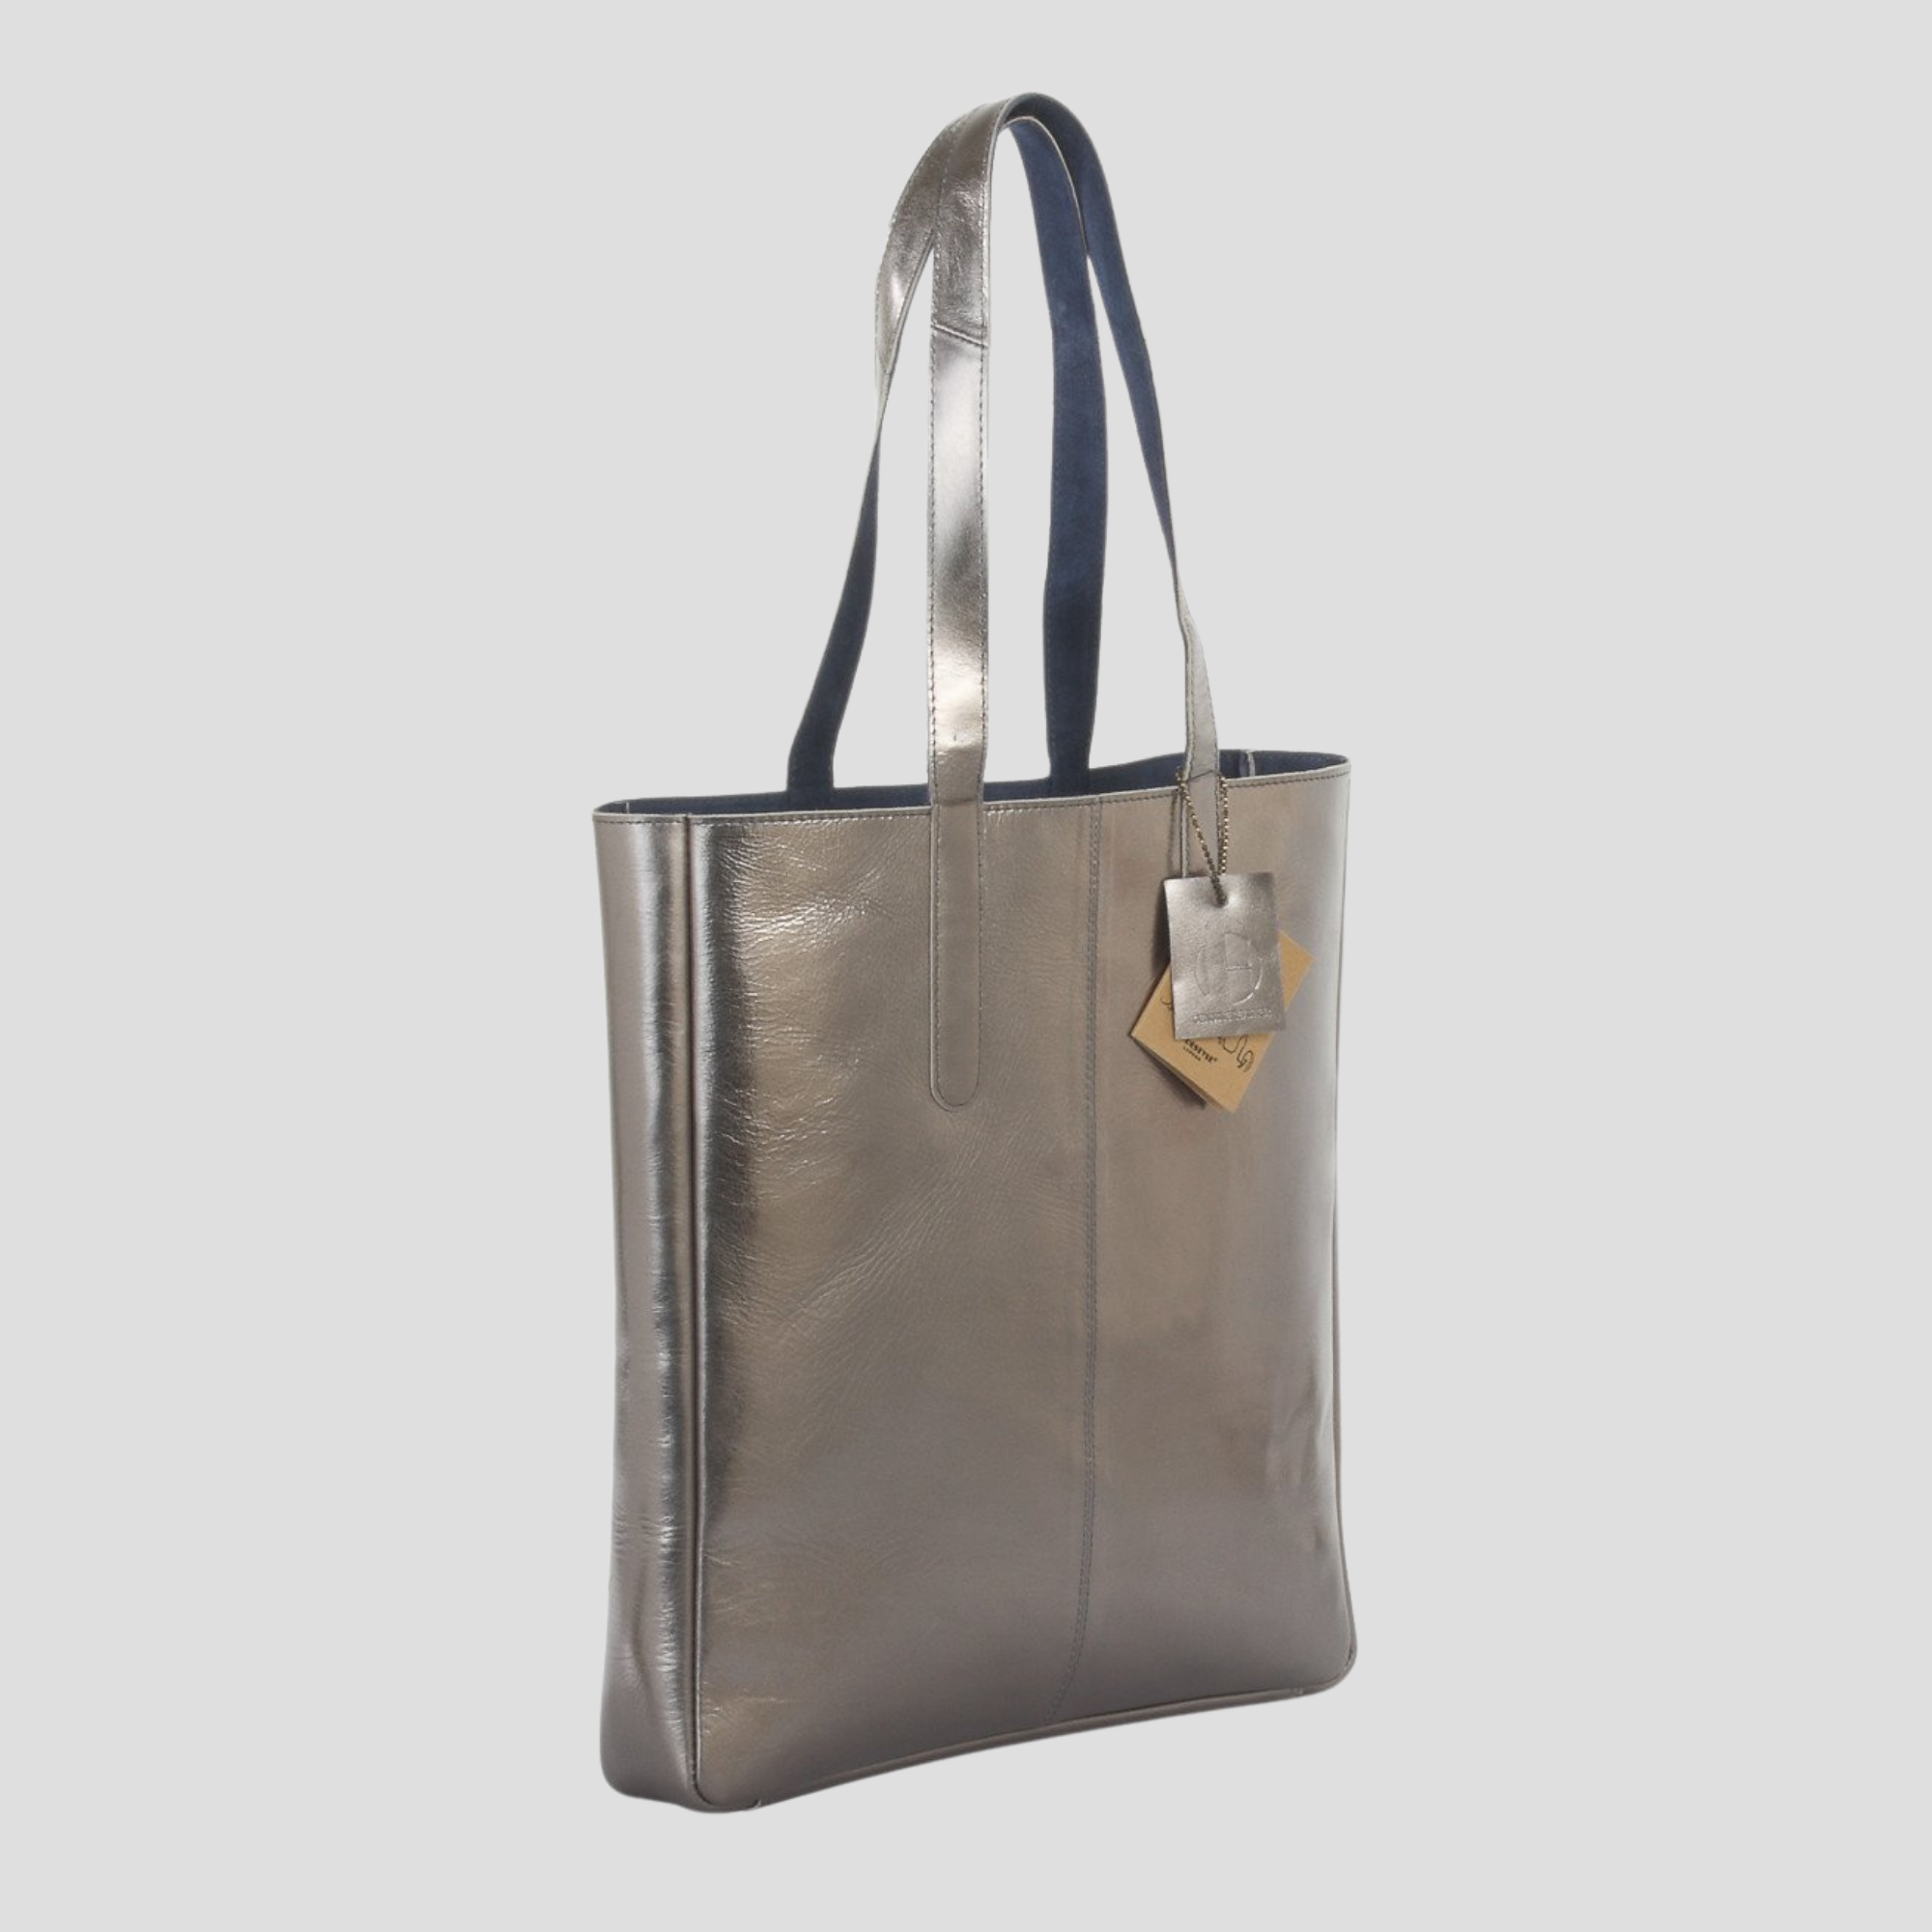 HYDESTYLE METALLIC SOFIA REVERSIBLE LEATHER TOTE BAG l Variety of colours